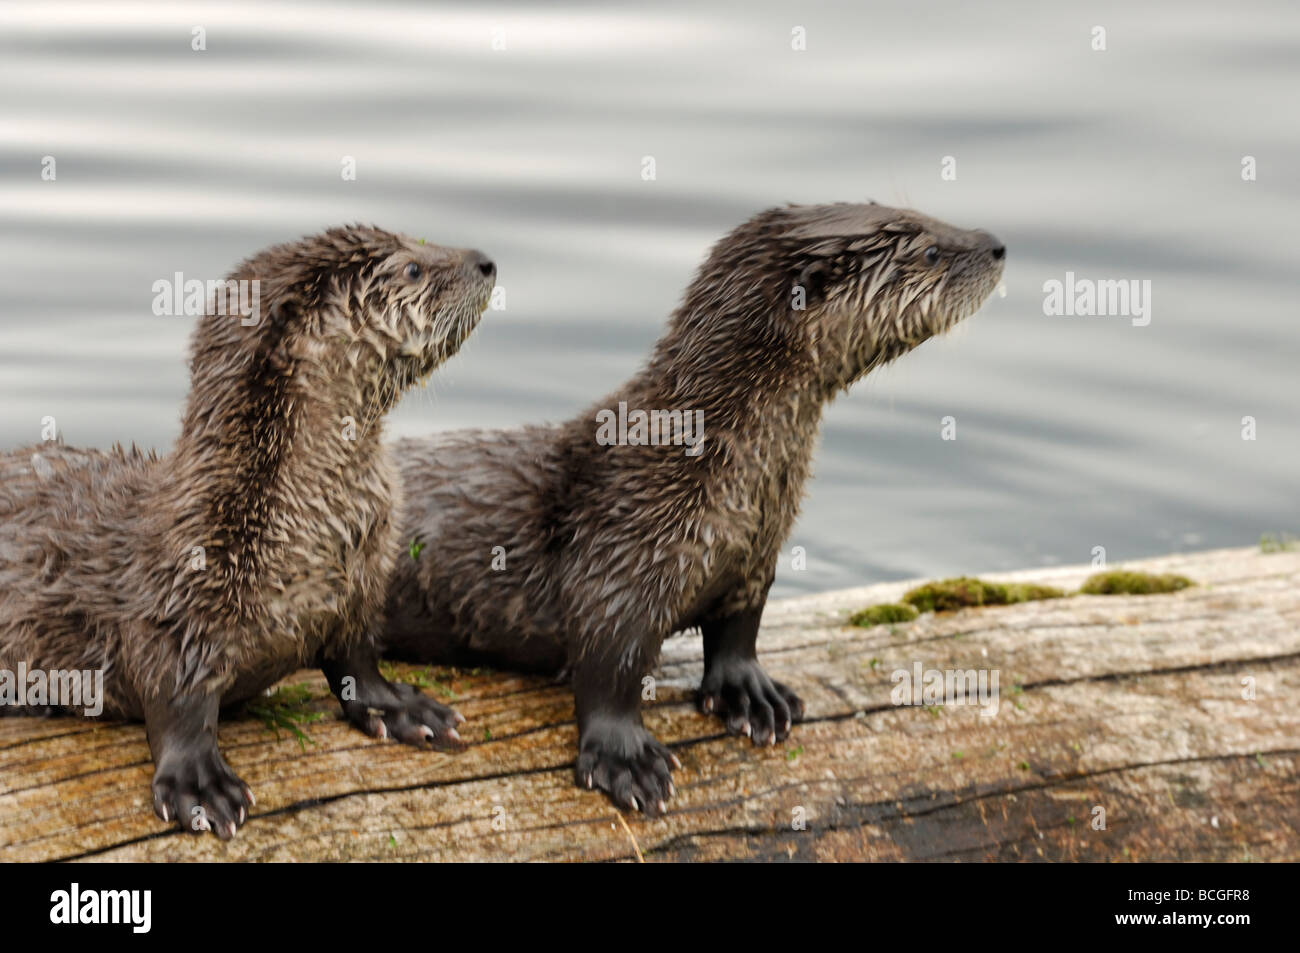 Stock photo of two river otter pups sitting on a log at a lake, Yellowstone National Park, Montana, 2009. Stock Photo